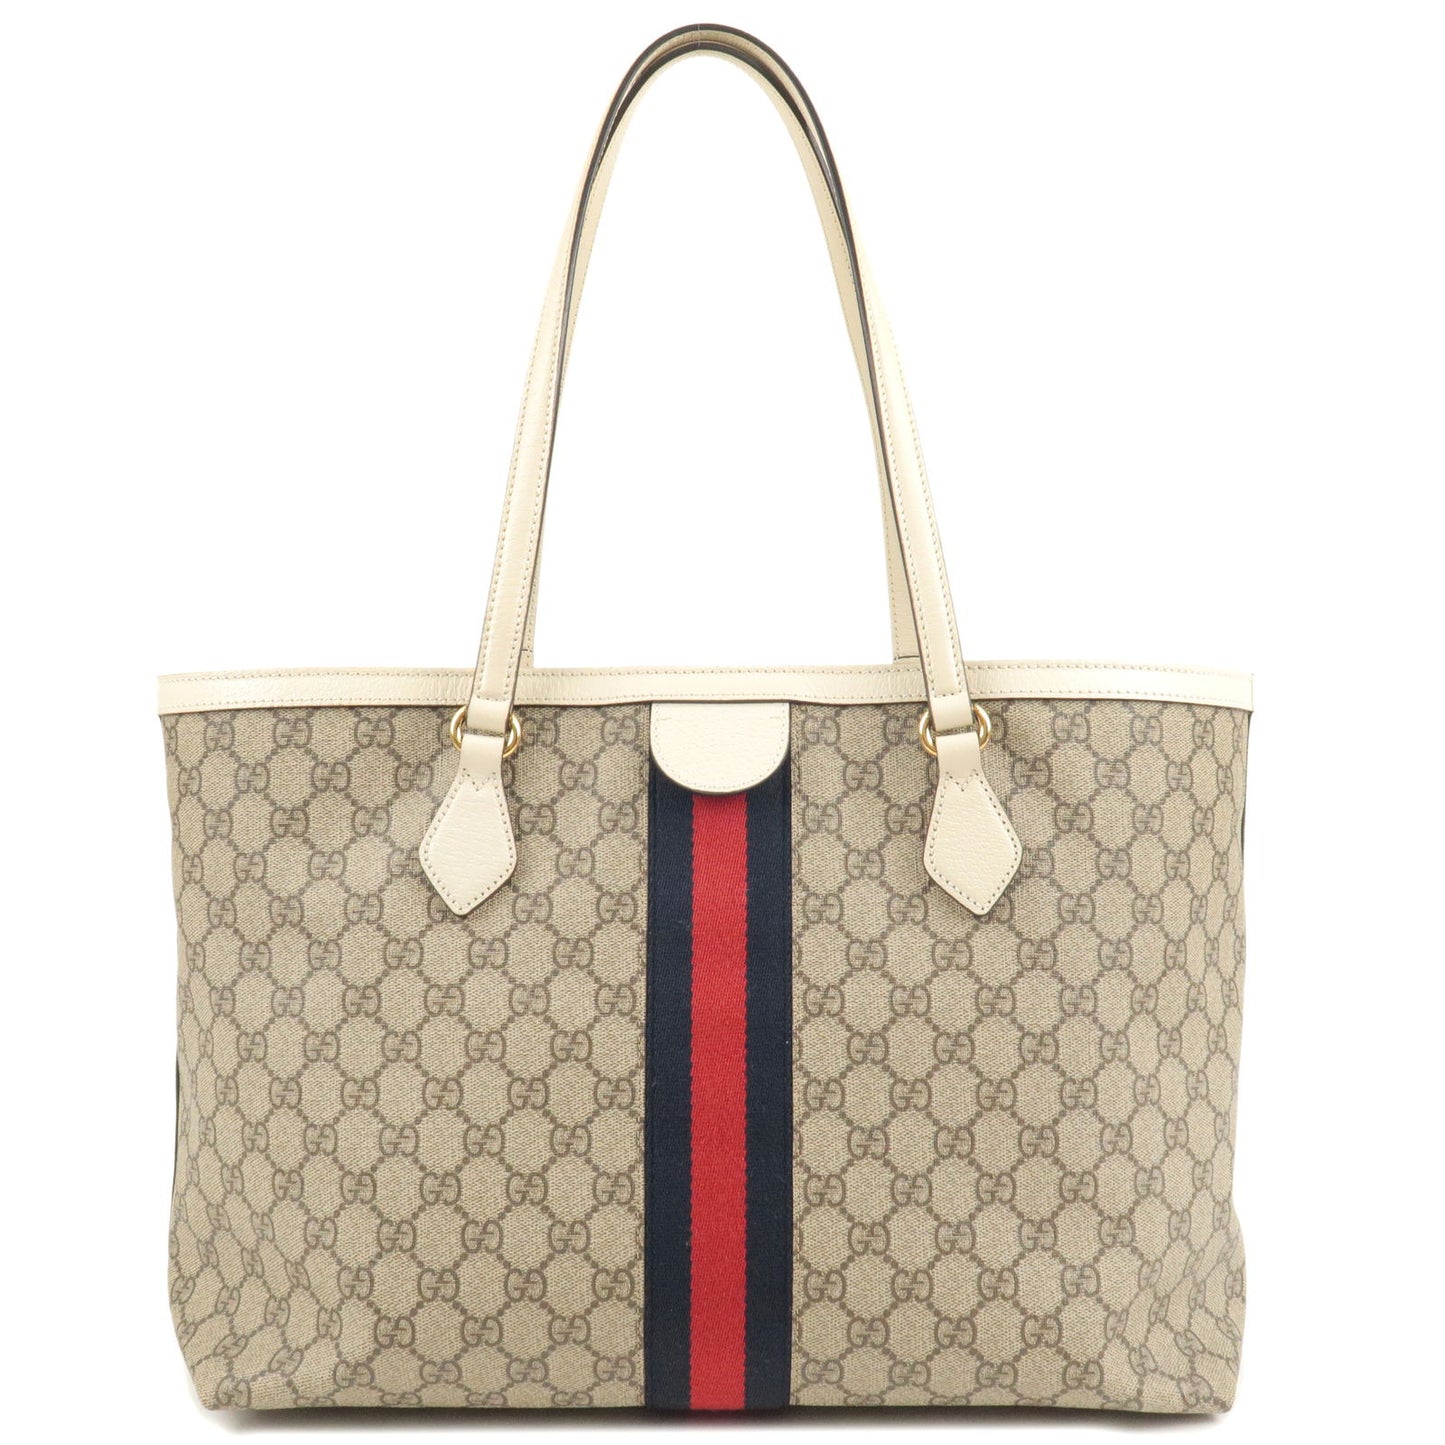 GUCCI Sherry Ophidia GG Supreme Leather Medium Tote Bag 631685